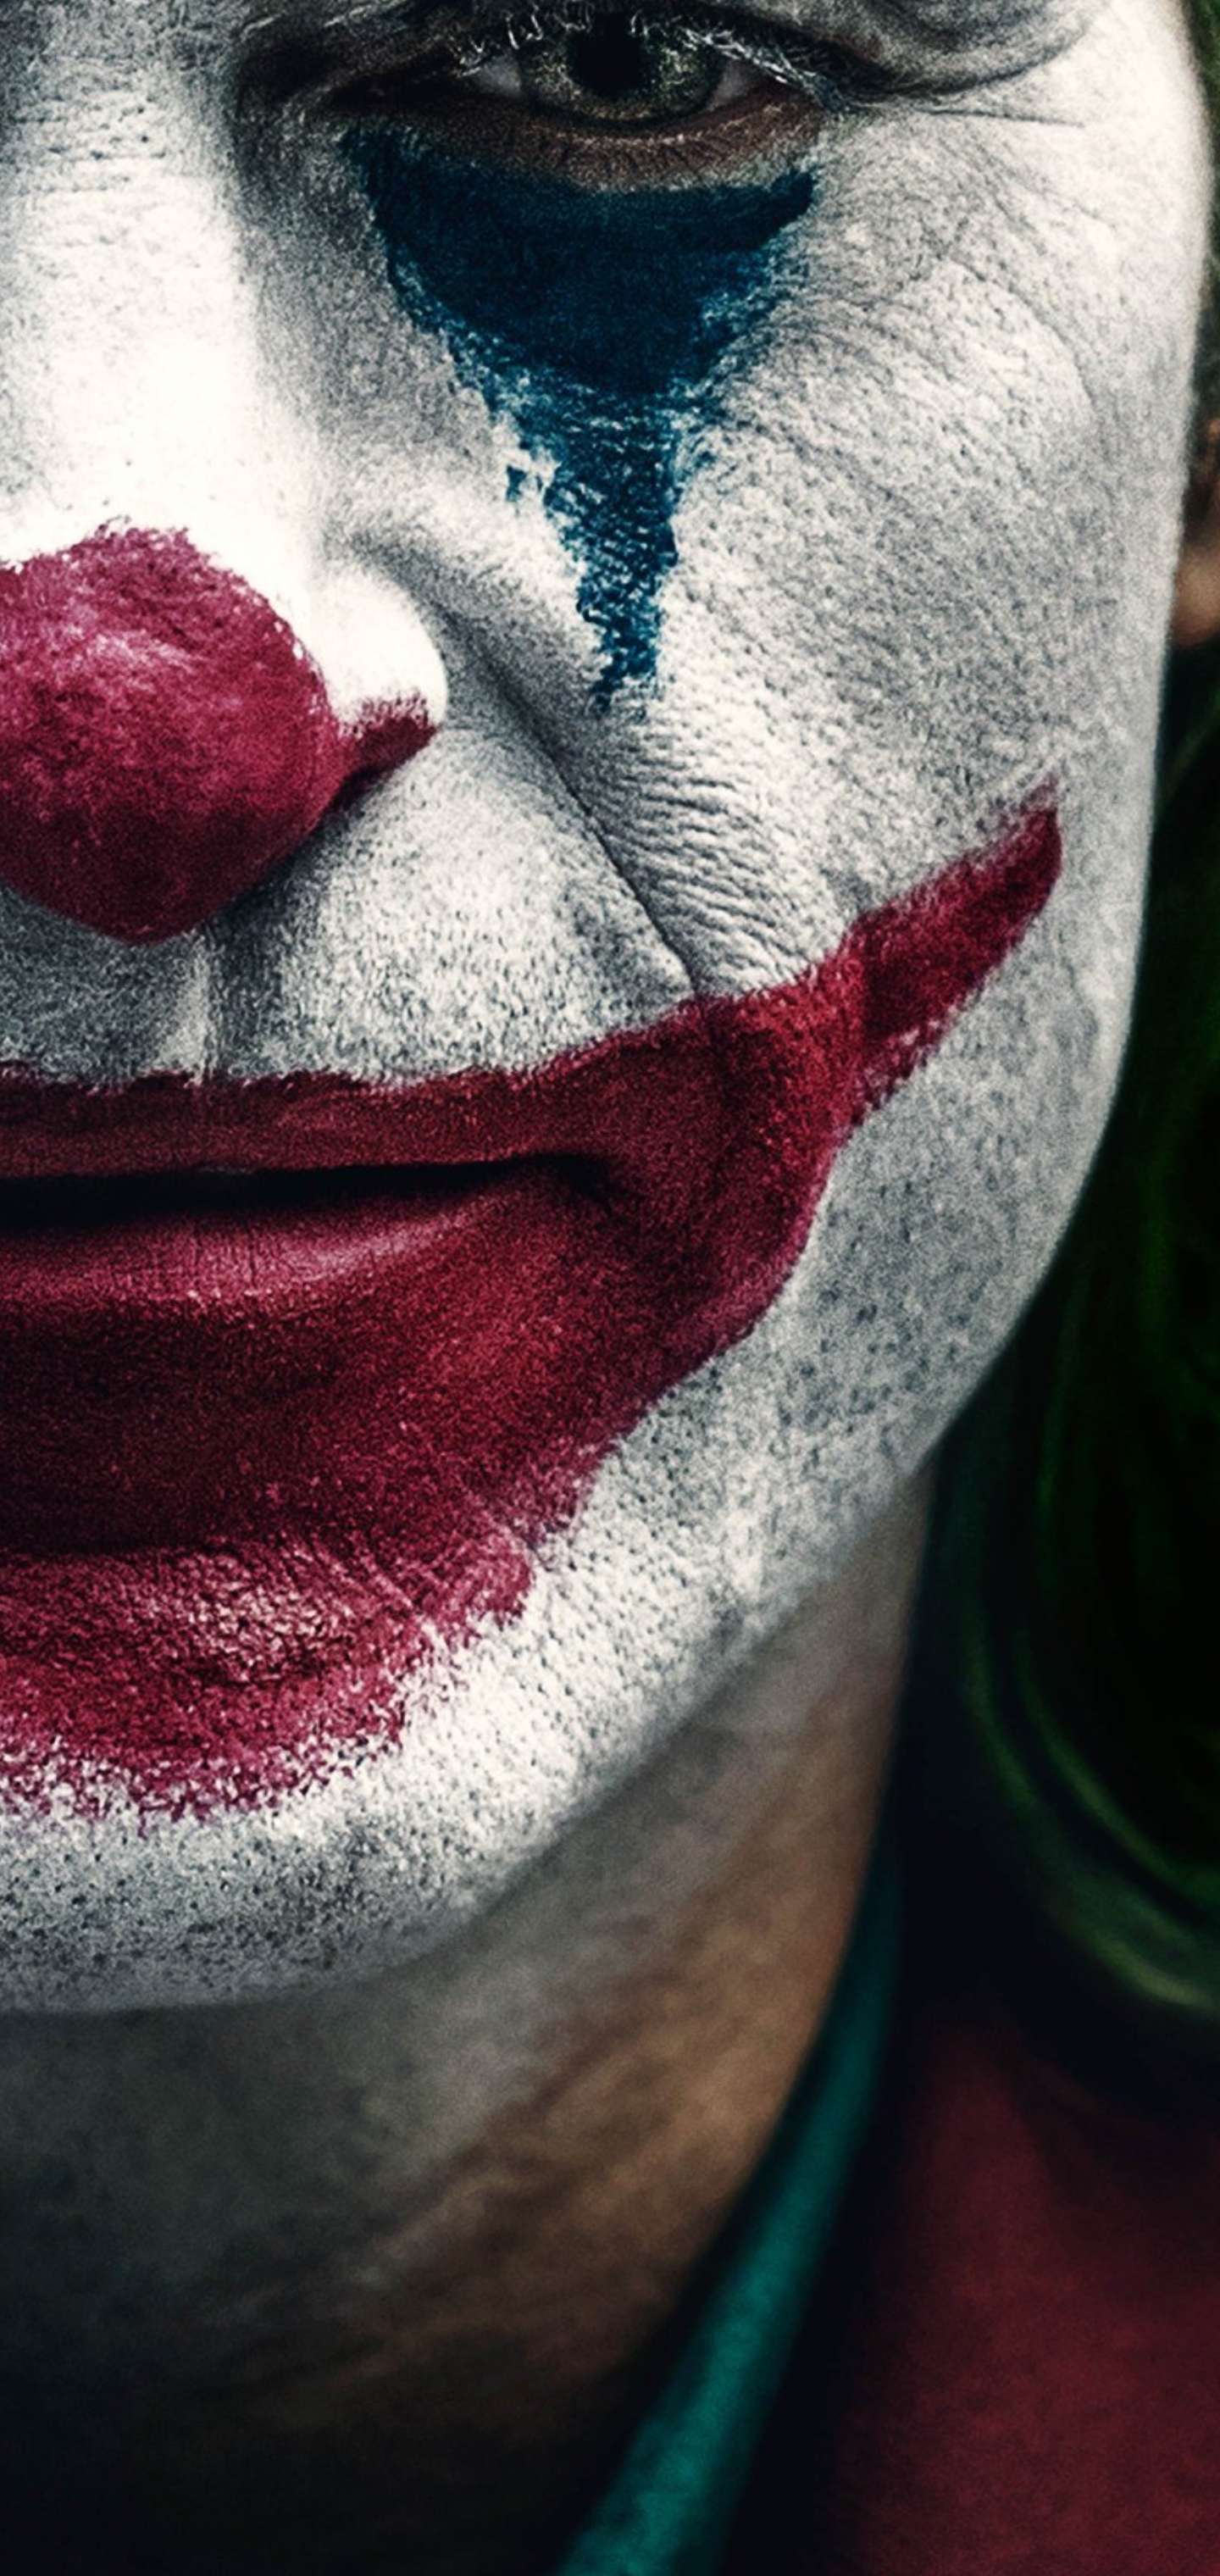 New Joker Movie Poster Wallpaper I made rNote10wallpapers 1440x3040